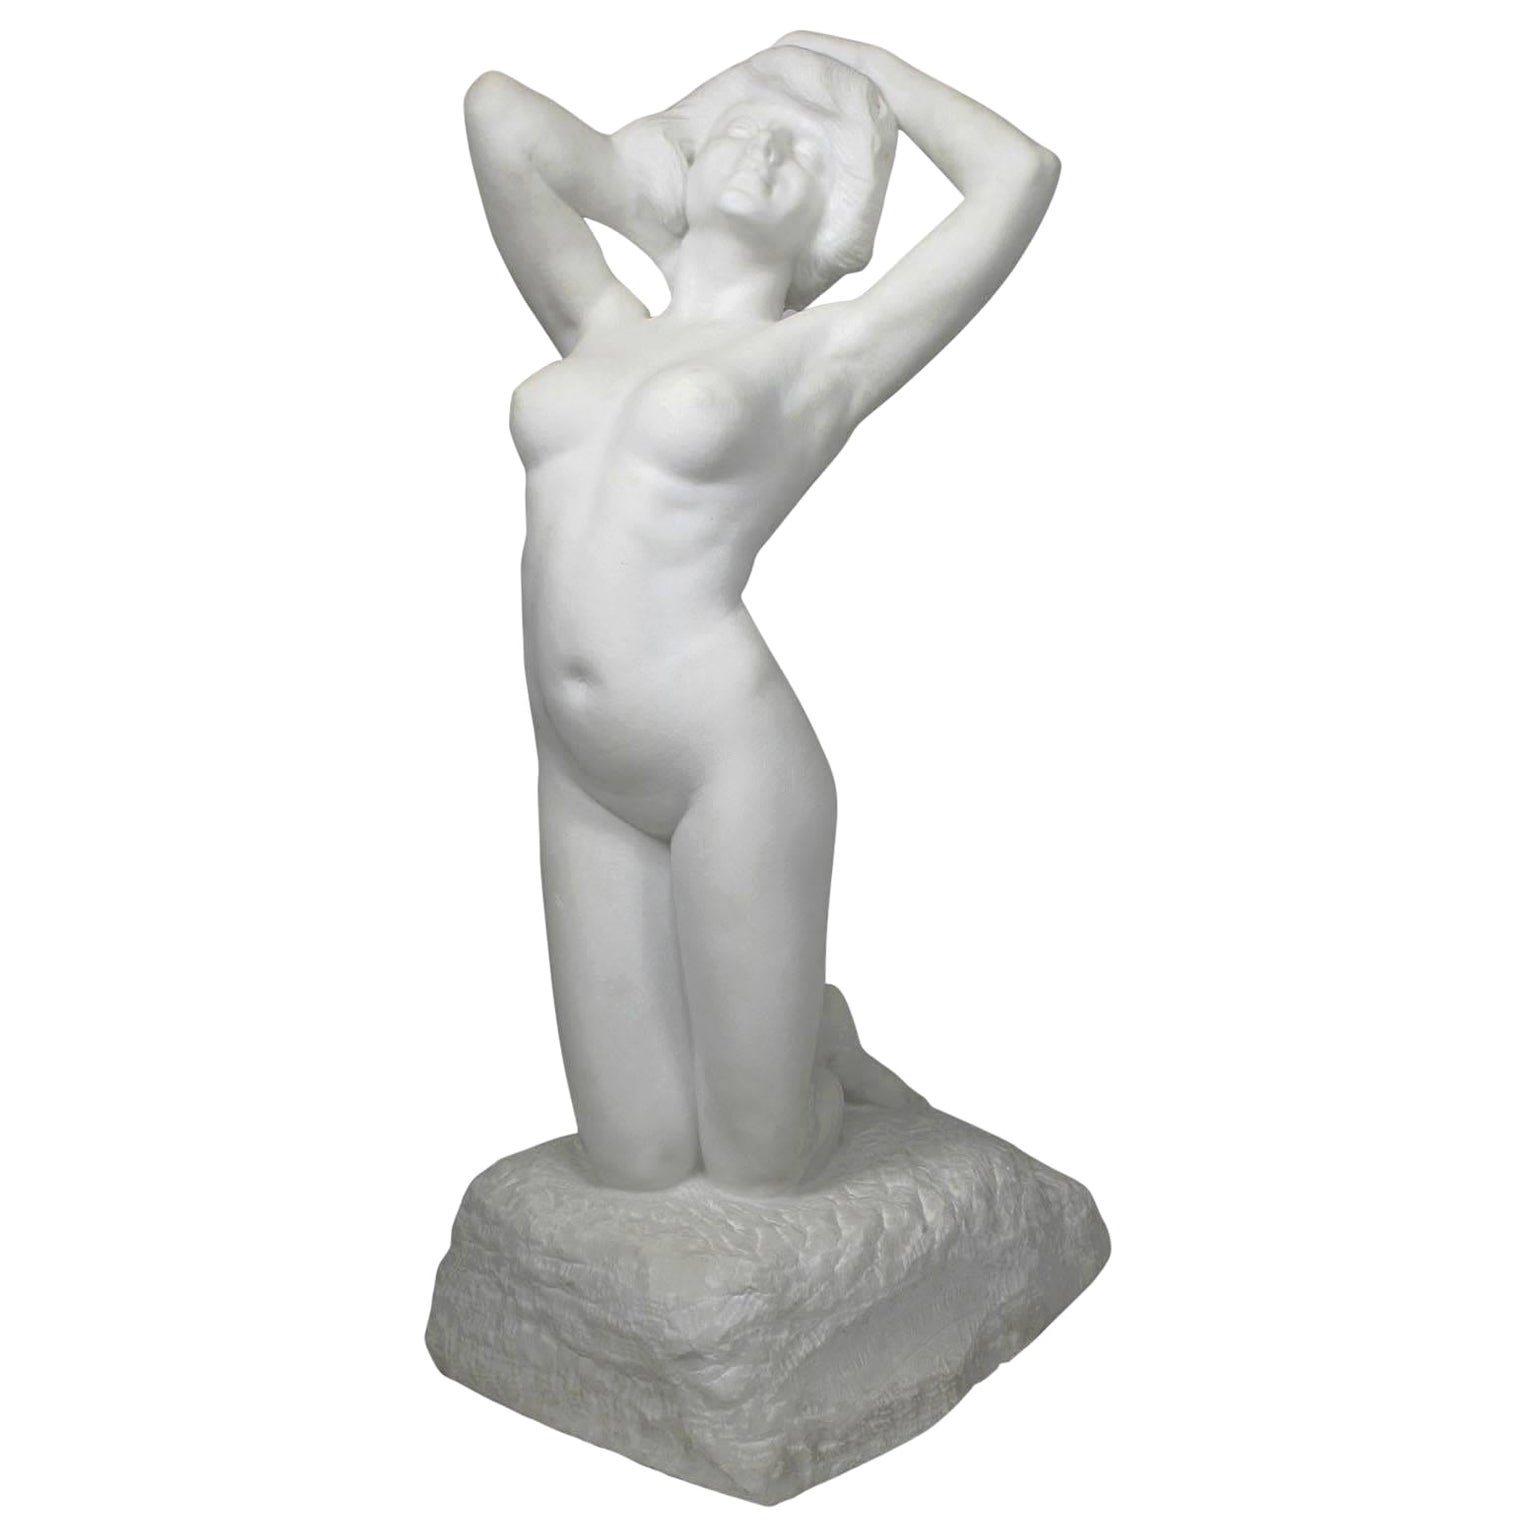 19th-20th Century Carved Marble Study Figure of a Kneeling Nude by Alice Nordin